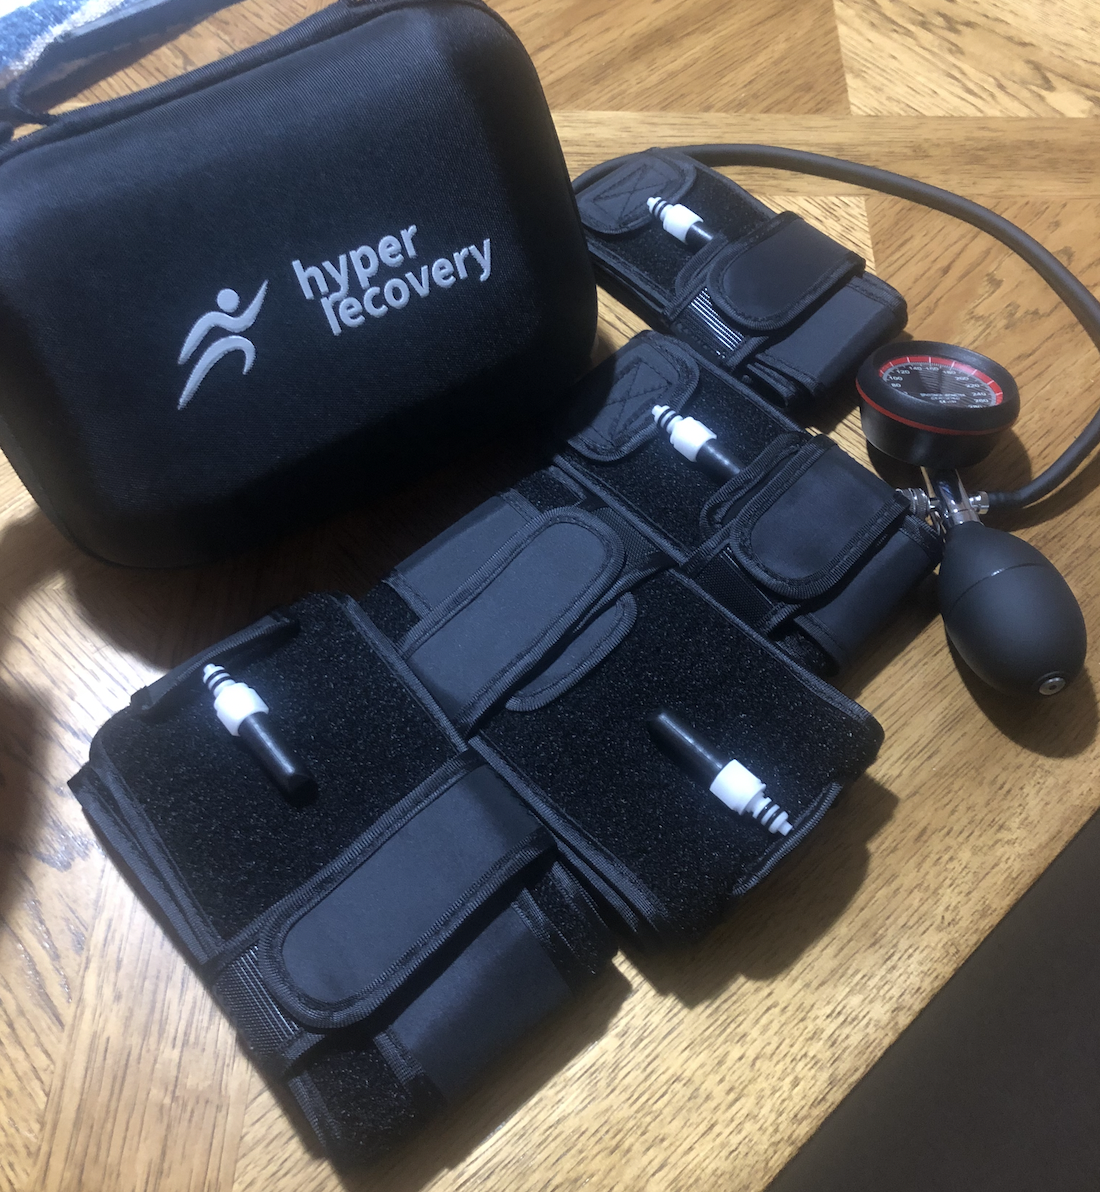 Reviewing my $45 dollar Blood Flow Restriction Cuffs